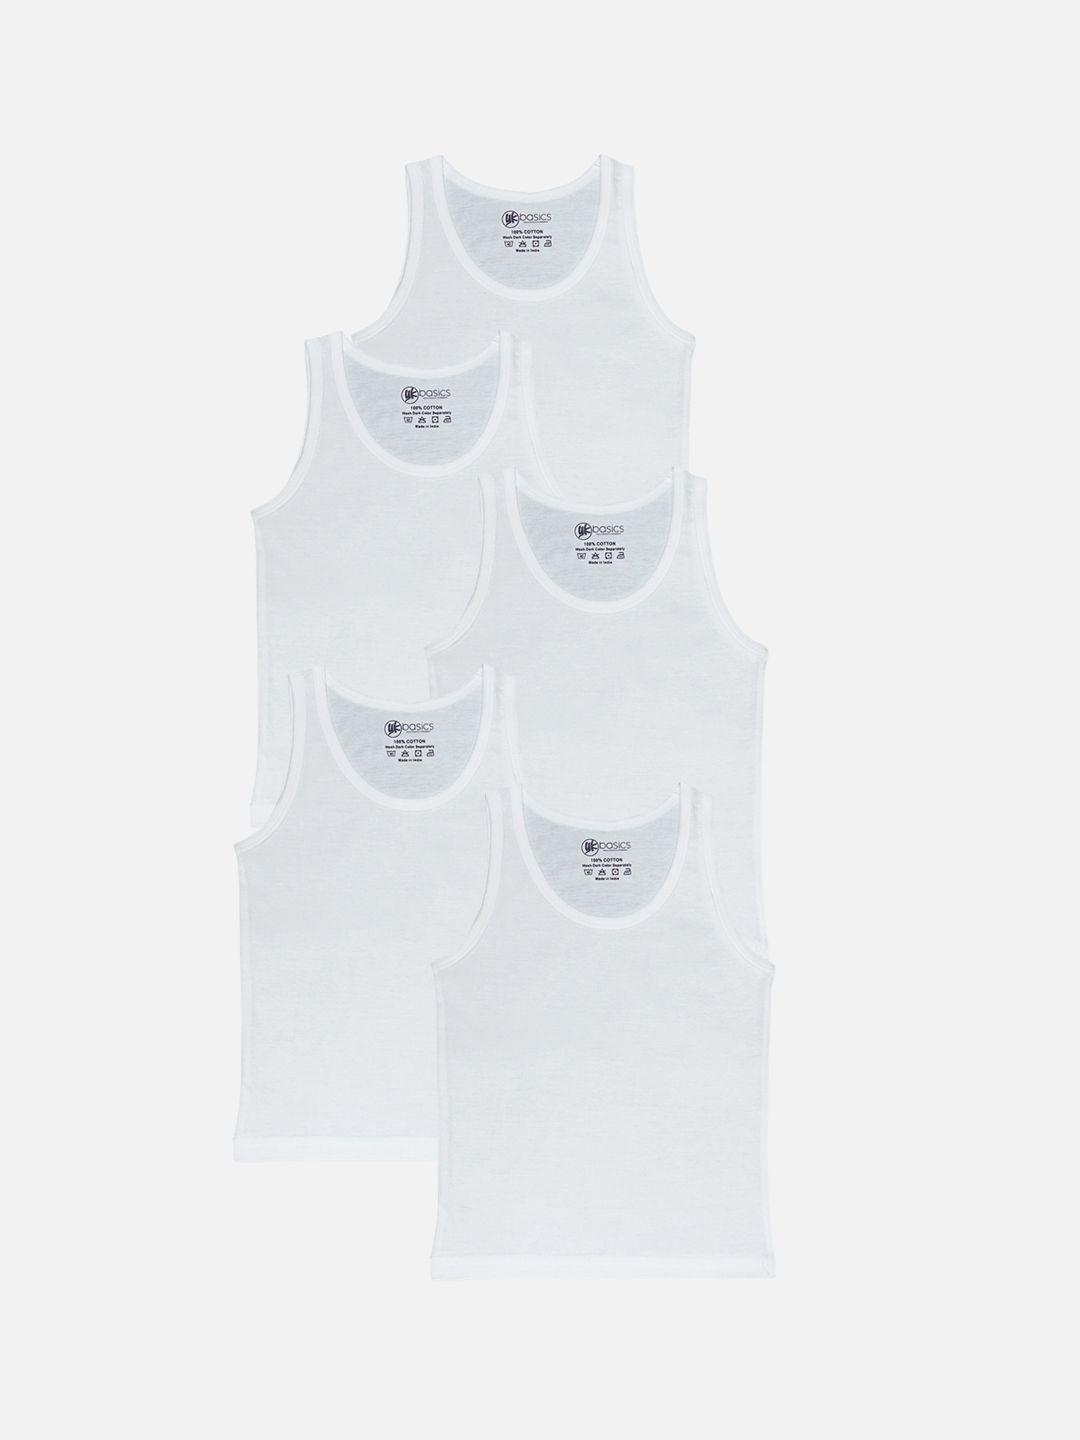 yk basics boys pack of 5 solid pure cotton innerwear vests